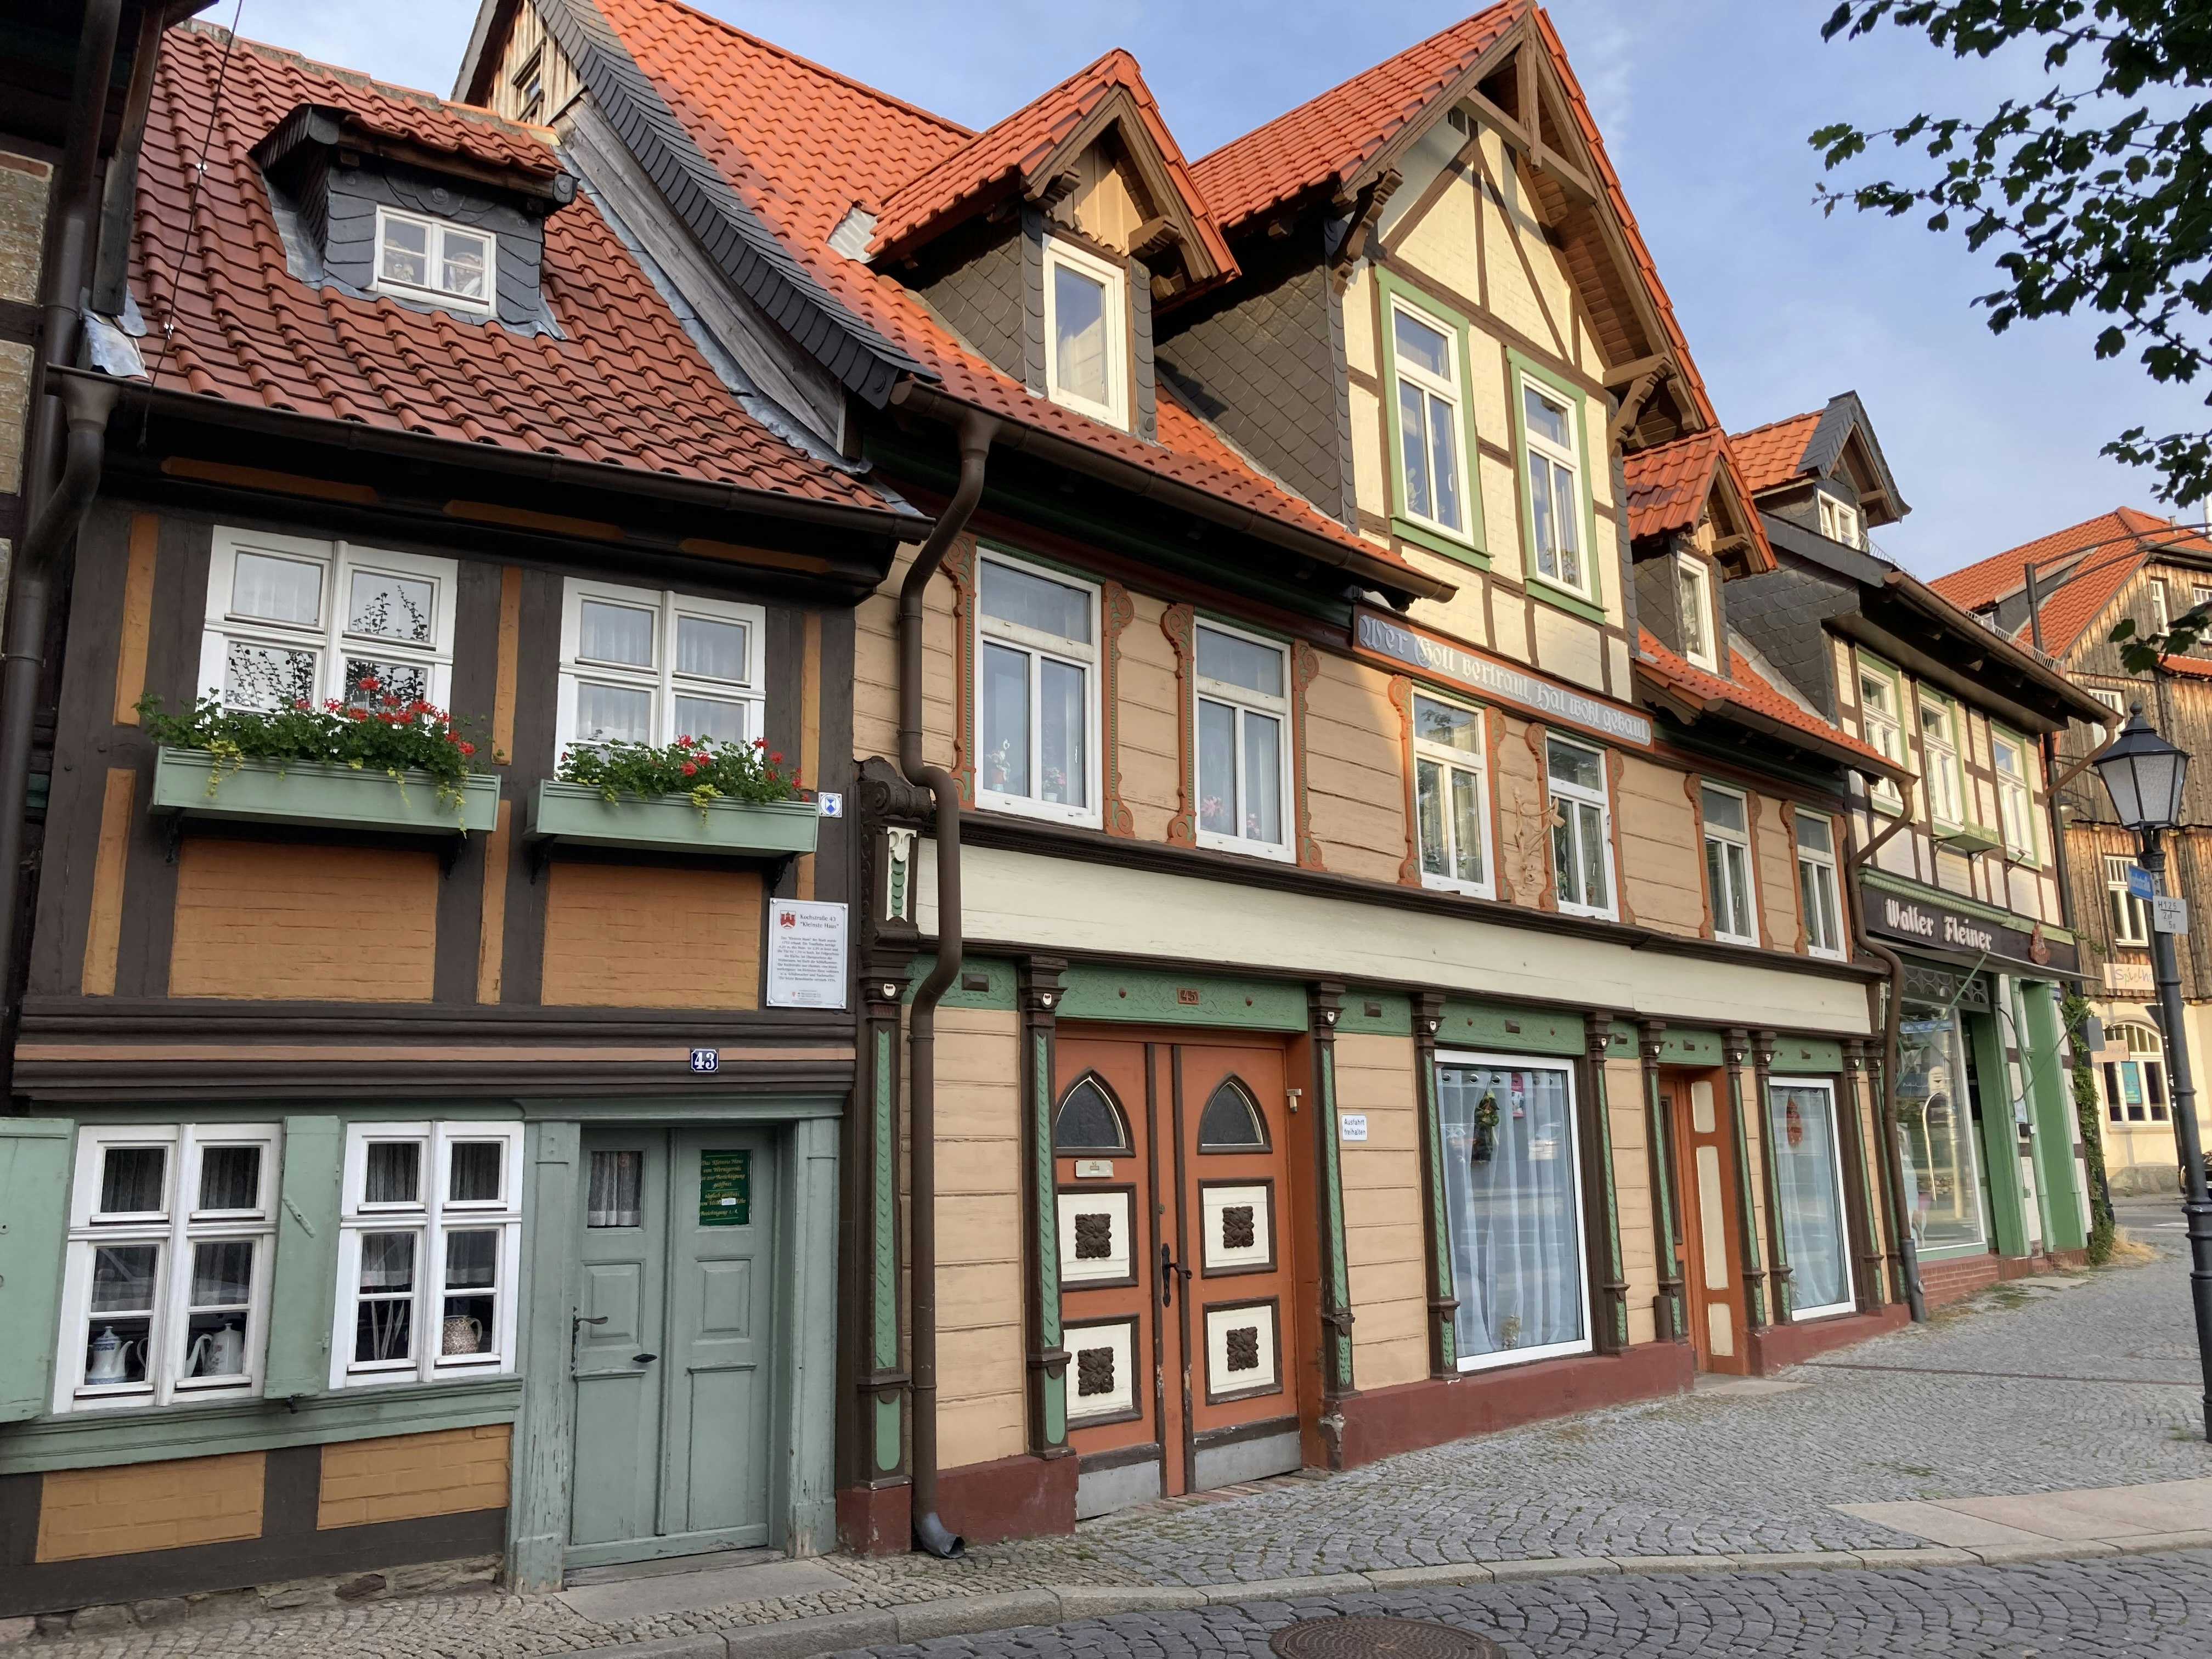 The smallest house in Wernigerode, Germany (left). 